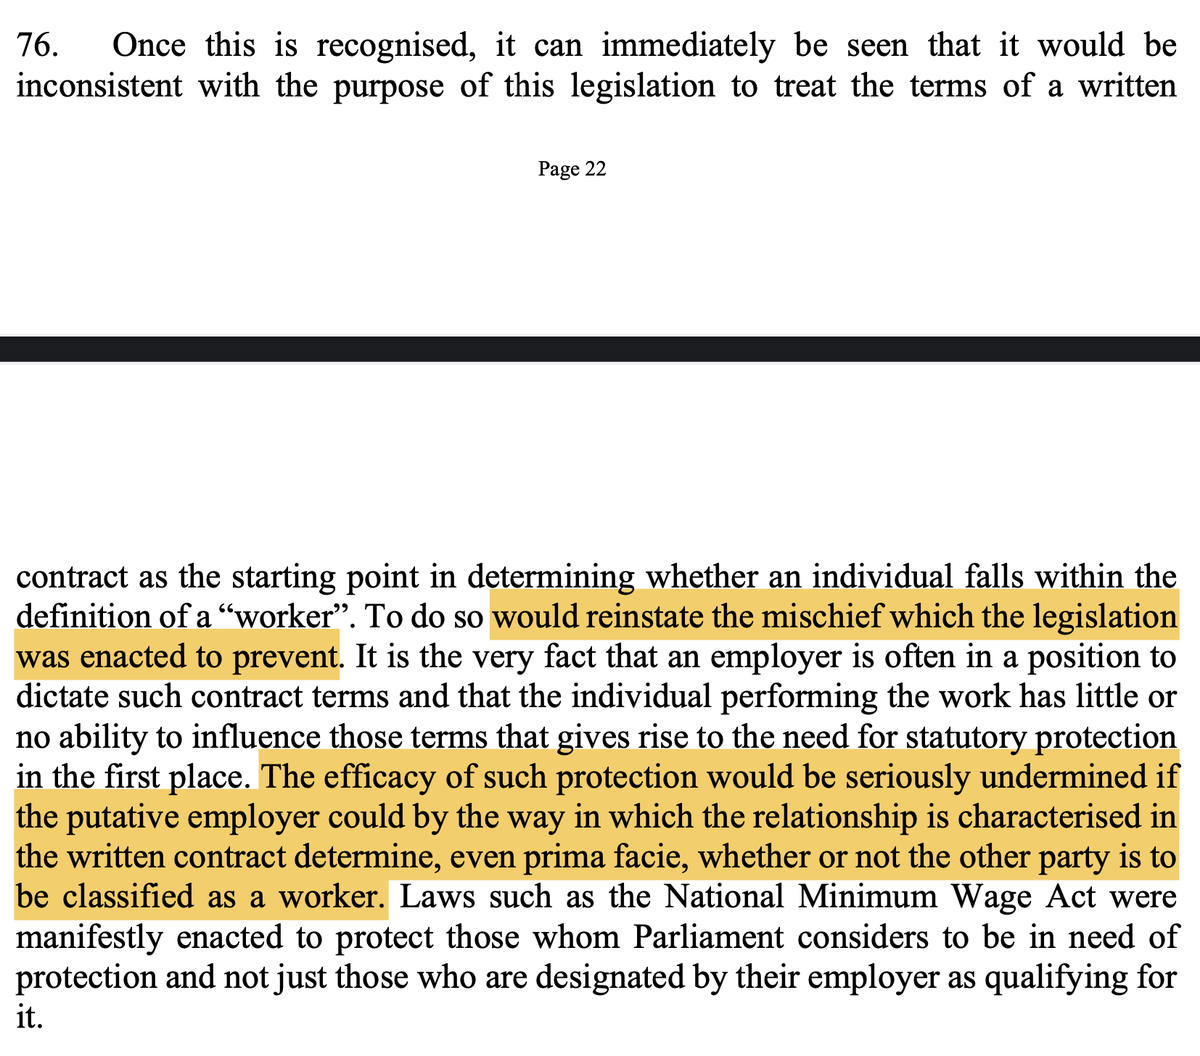  Paragraph [76] is destined to enter the pantheon of employment law – contractual interpretation alone ‘would reinstate the mischief which the legislation was enacted to prevent’ 